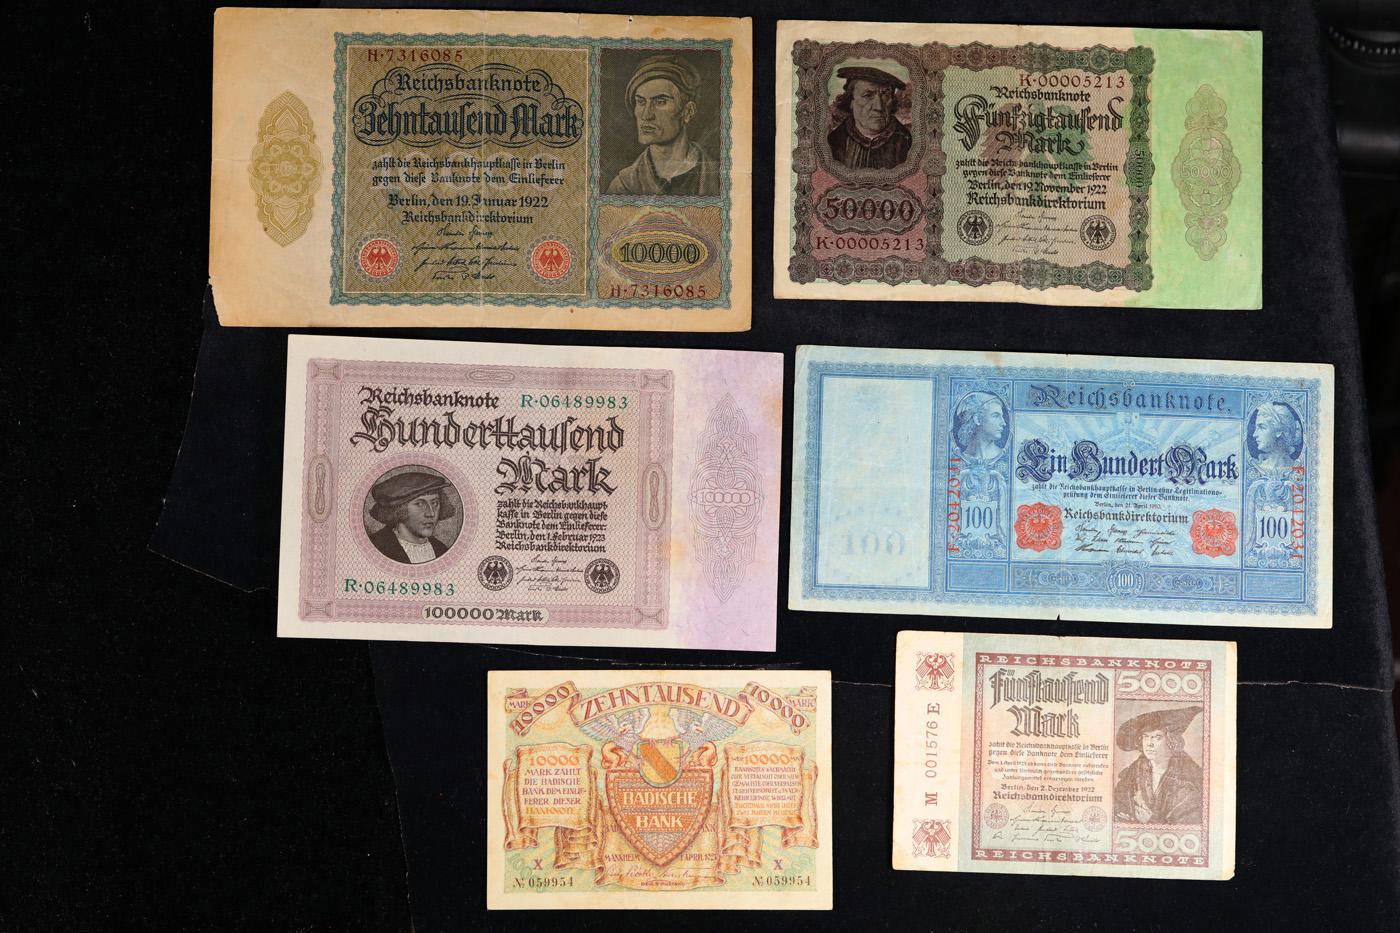 Group of 10 Early 1900's WWI German Hyperinflation Notes Inclduing "Vampire" Note